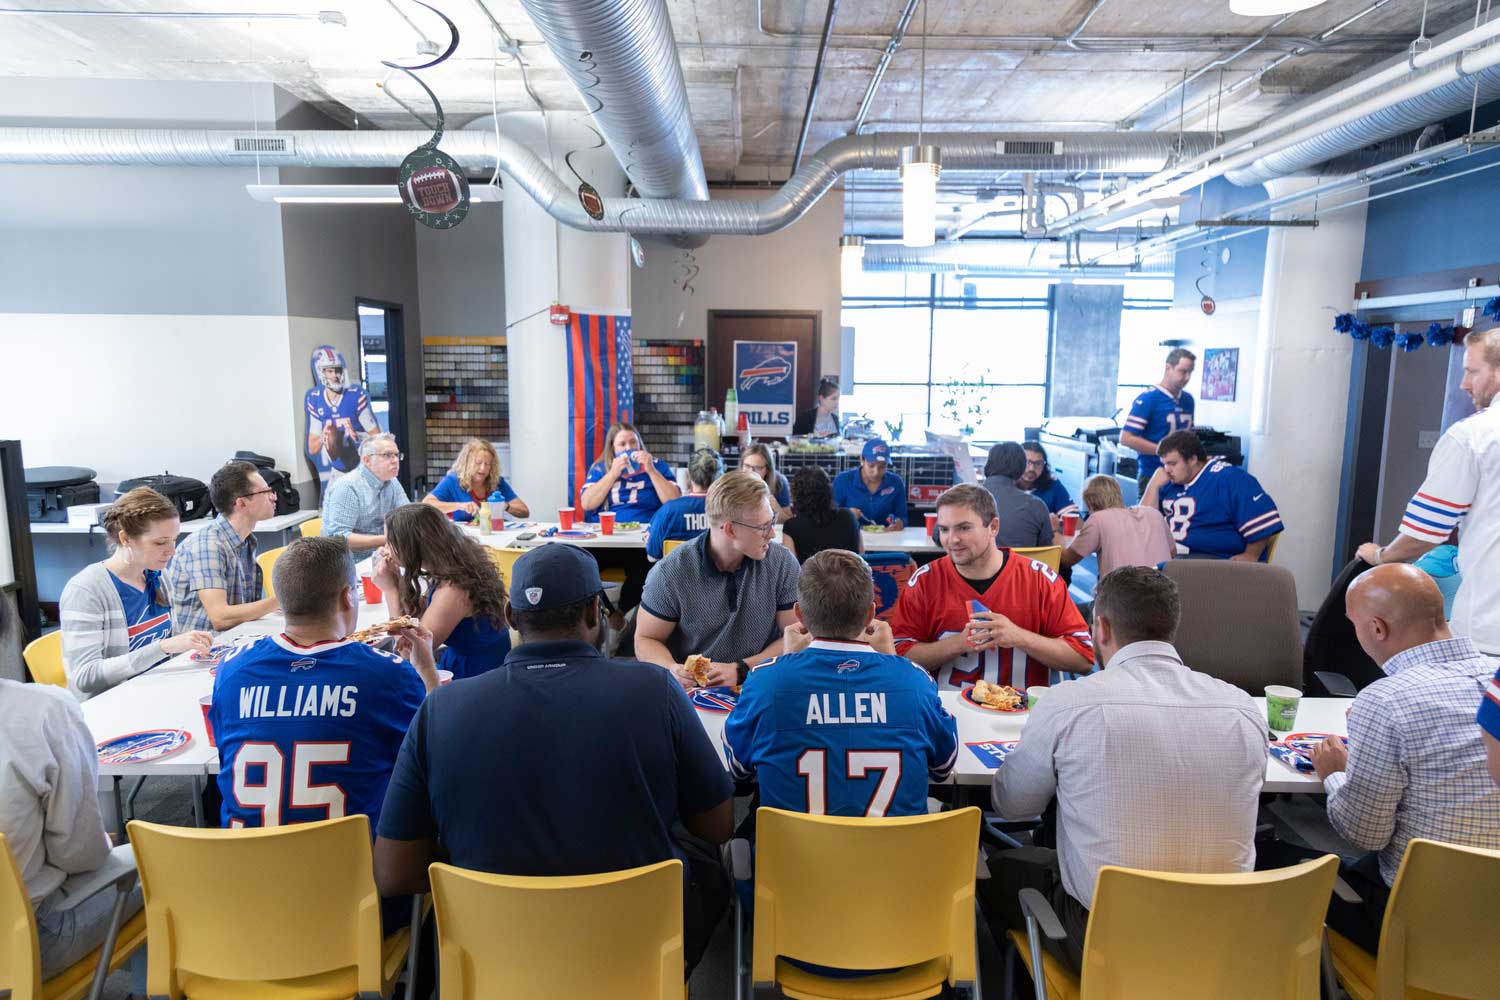 CPL's Buffalo NY team sits around tables wearing Buffalo Bills jerseys and talking to each other. Image shows mostly men sitting around tables. 